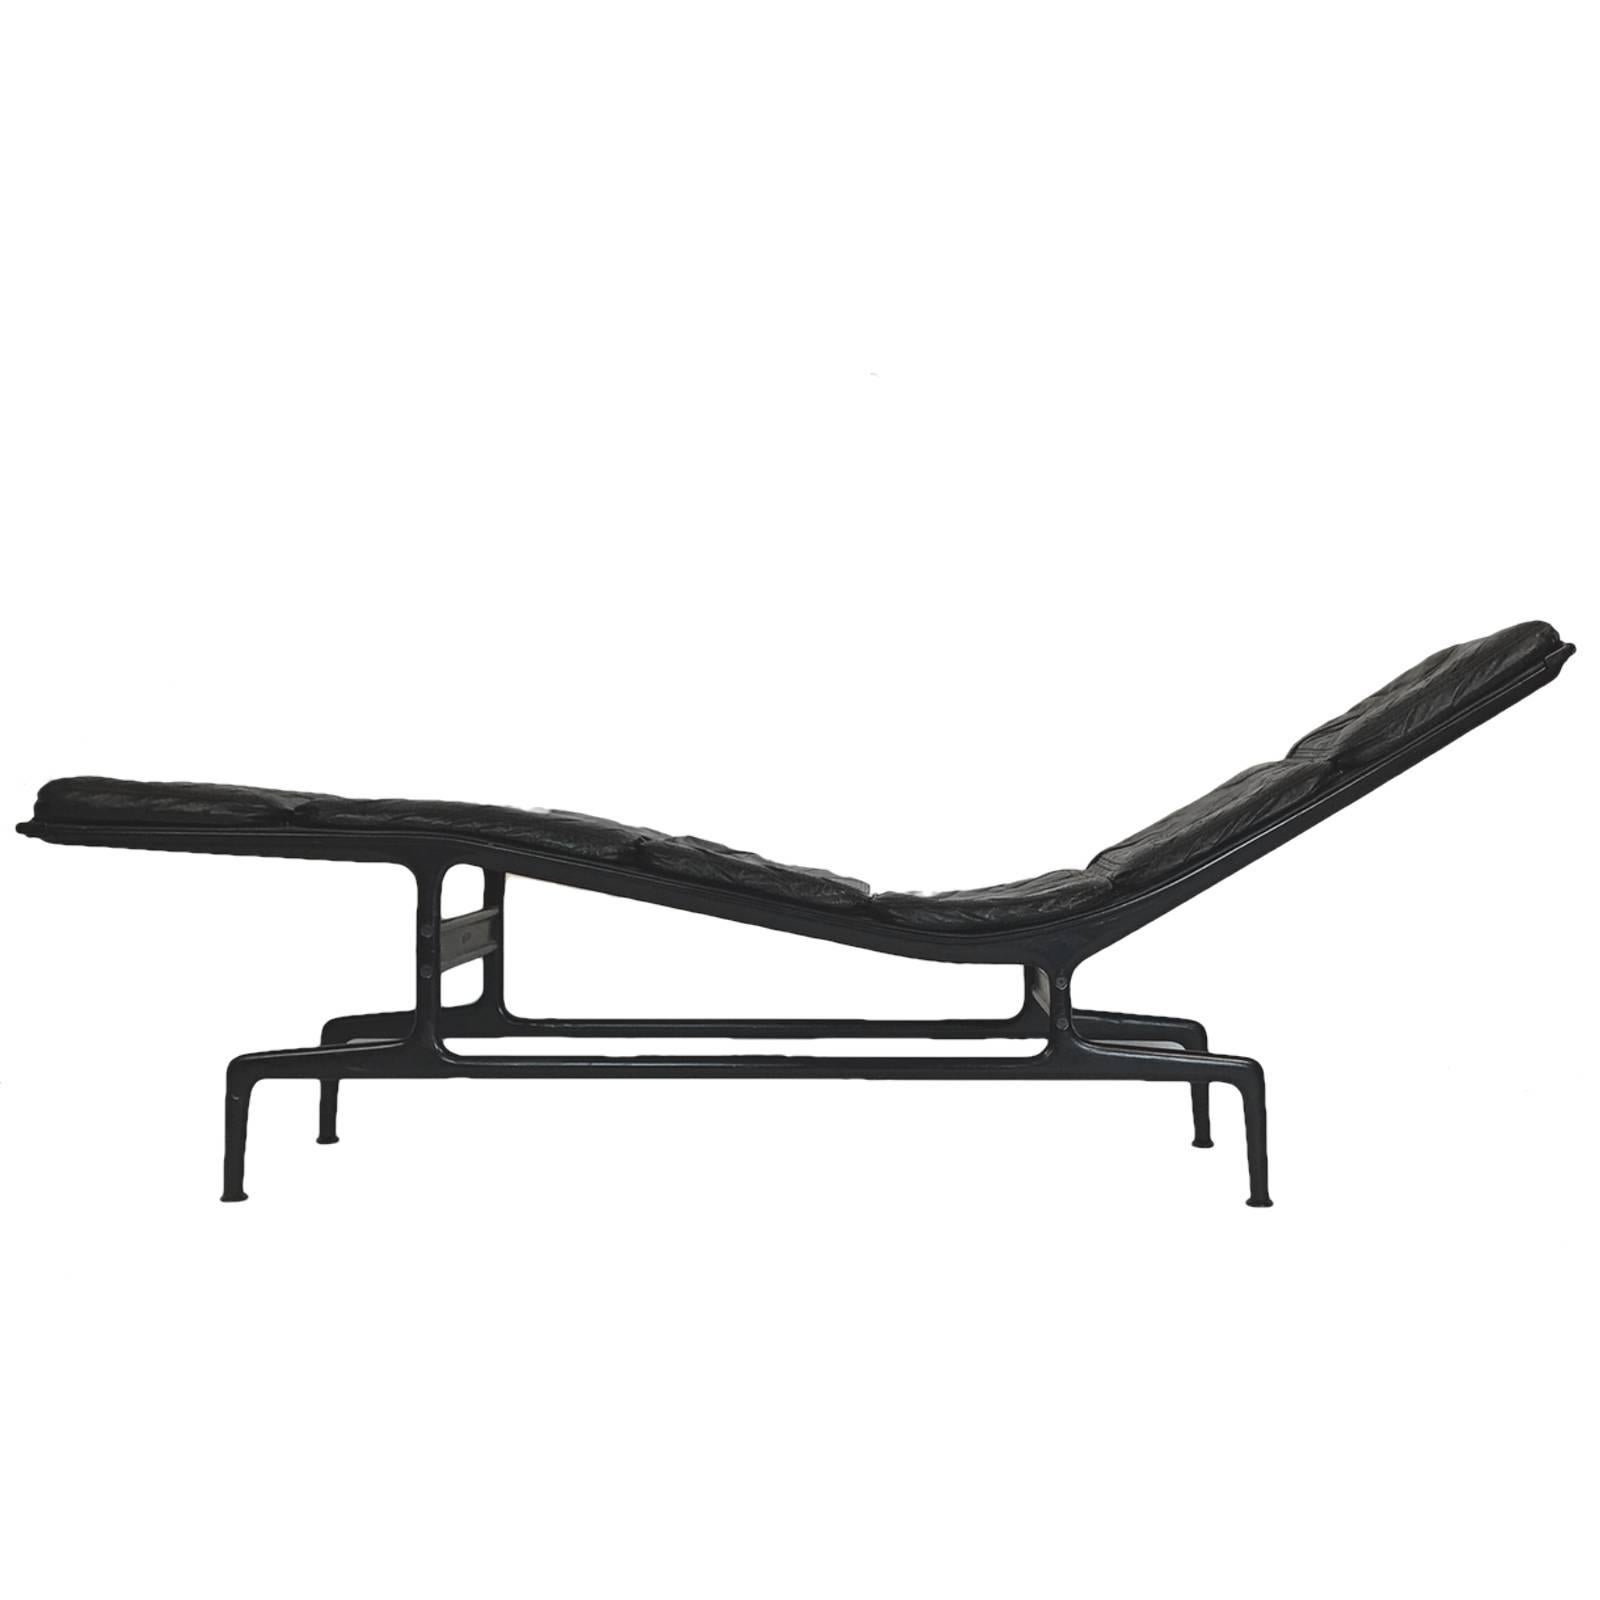 An iconic design by Charles Eames for Herman Miller. Often referred to as the Billy Wilder chaise lounge named after the director for whom the chaise was designed. Black leather cushions with eggplant powder coated frame with two leather